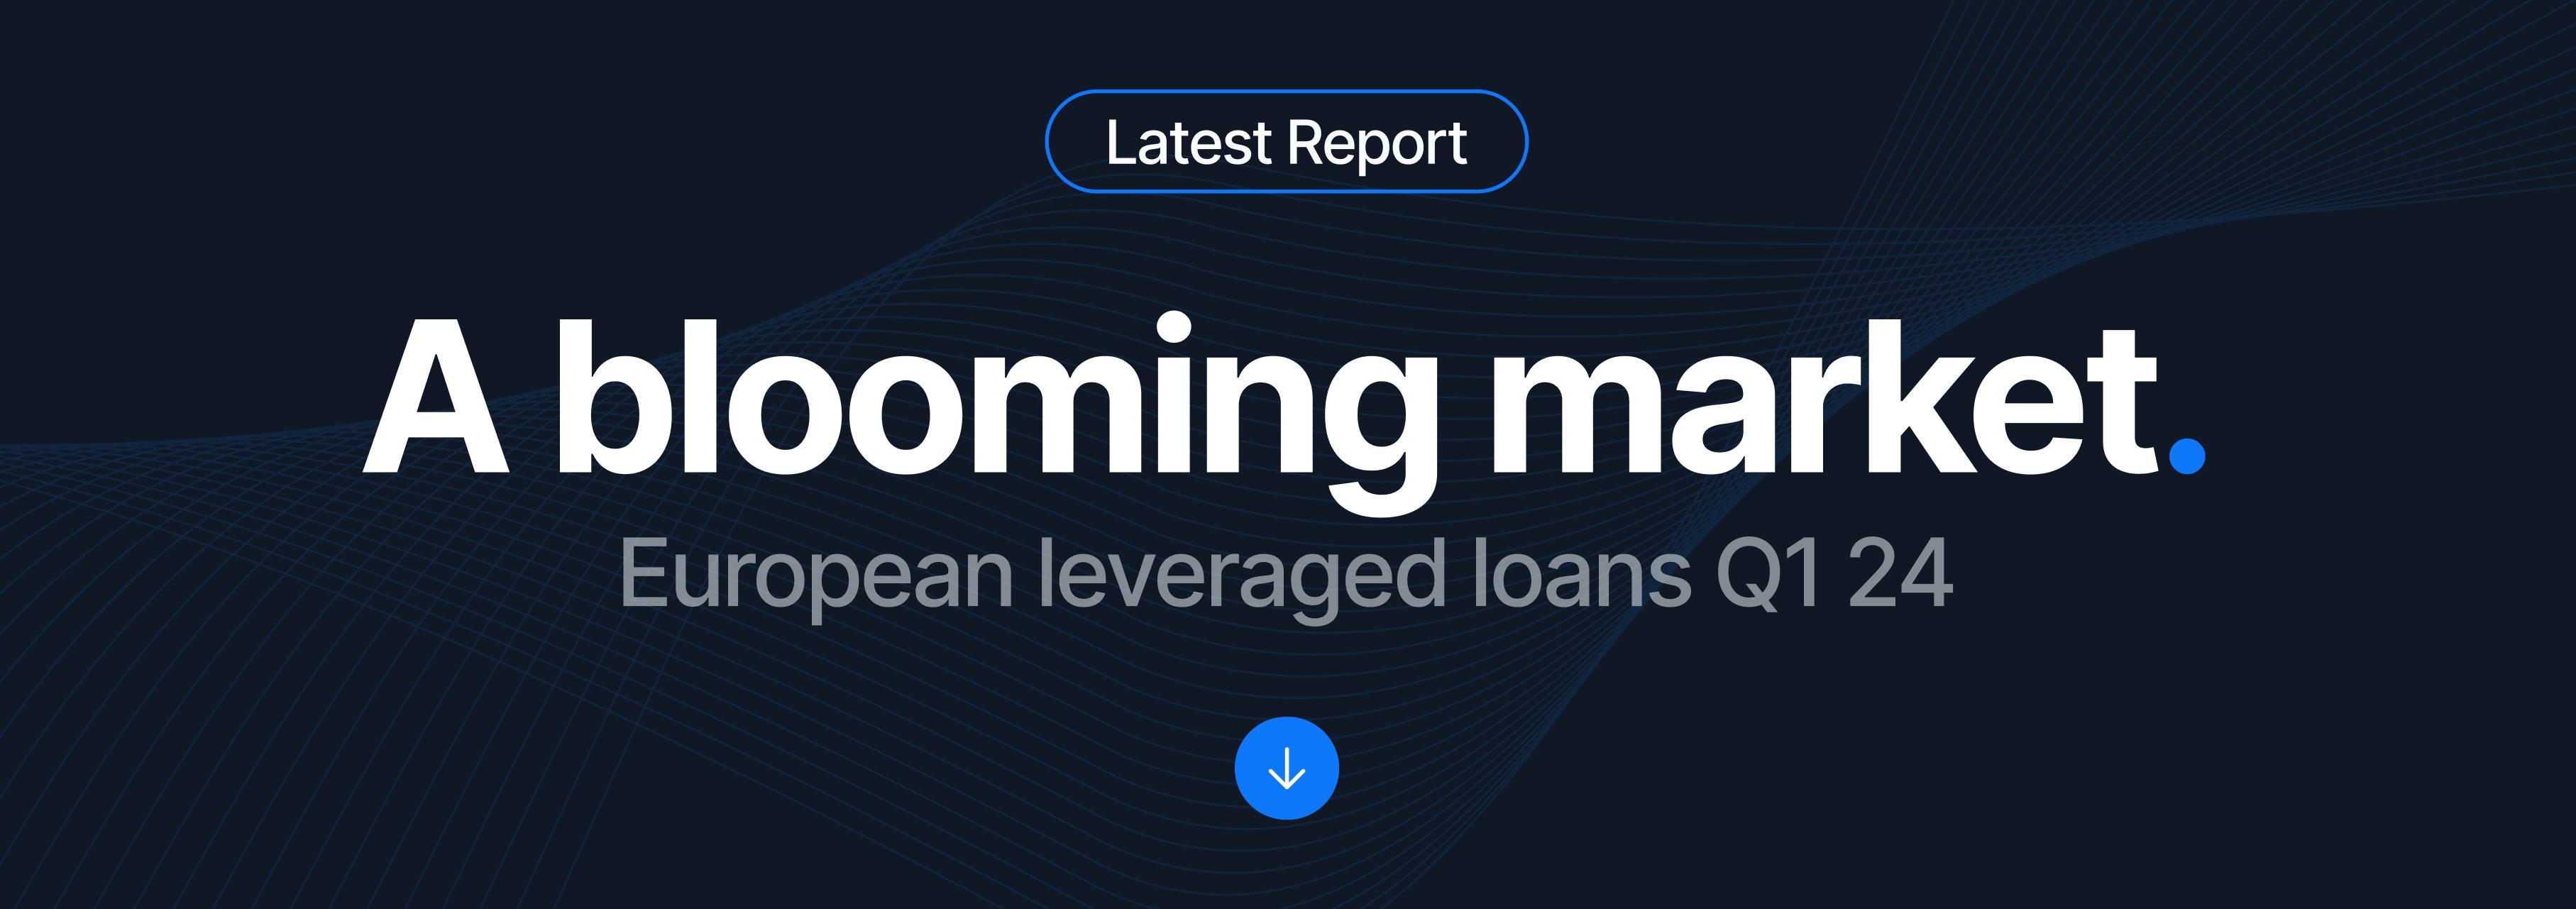 European leveraged loans Q1 24 — A blooming market